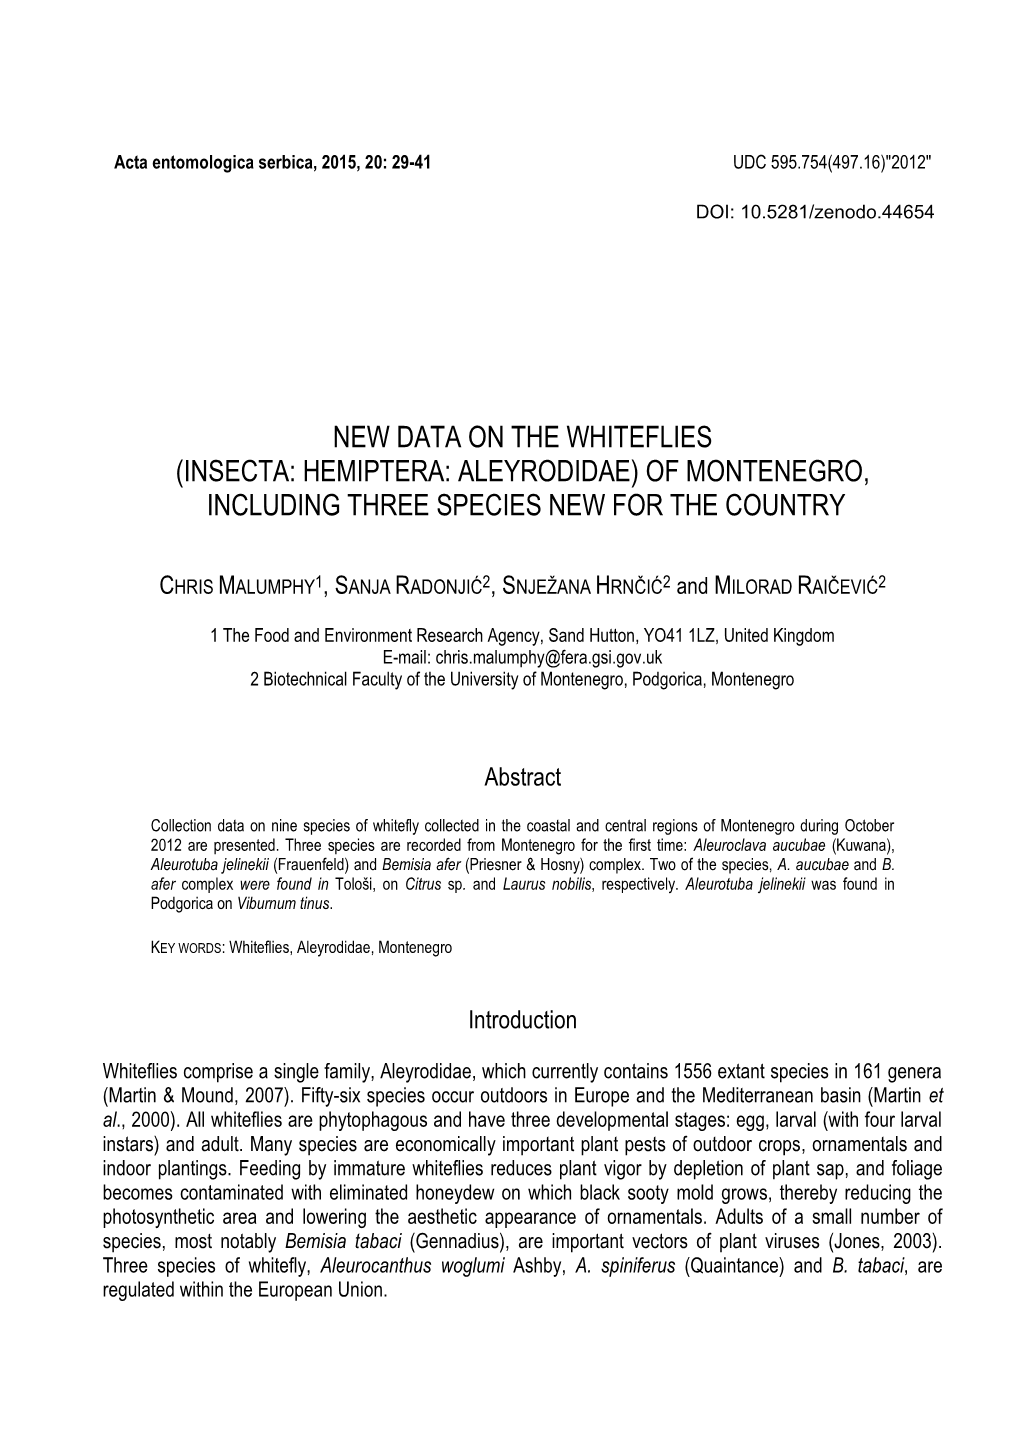 New Data on the Whiteflies (Insecta: Hemiptera: Aleyrodidae) of Montenegro, Including Three Species New for the Country